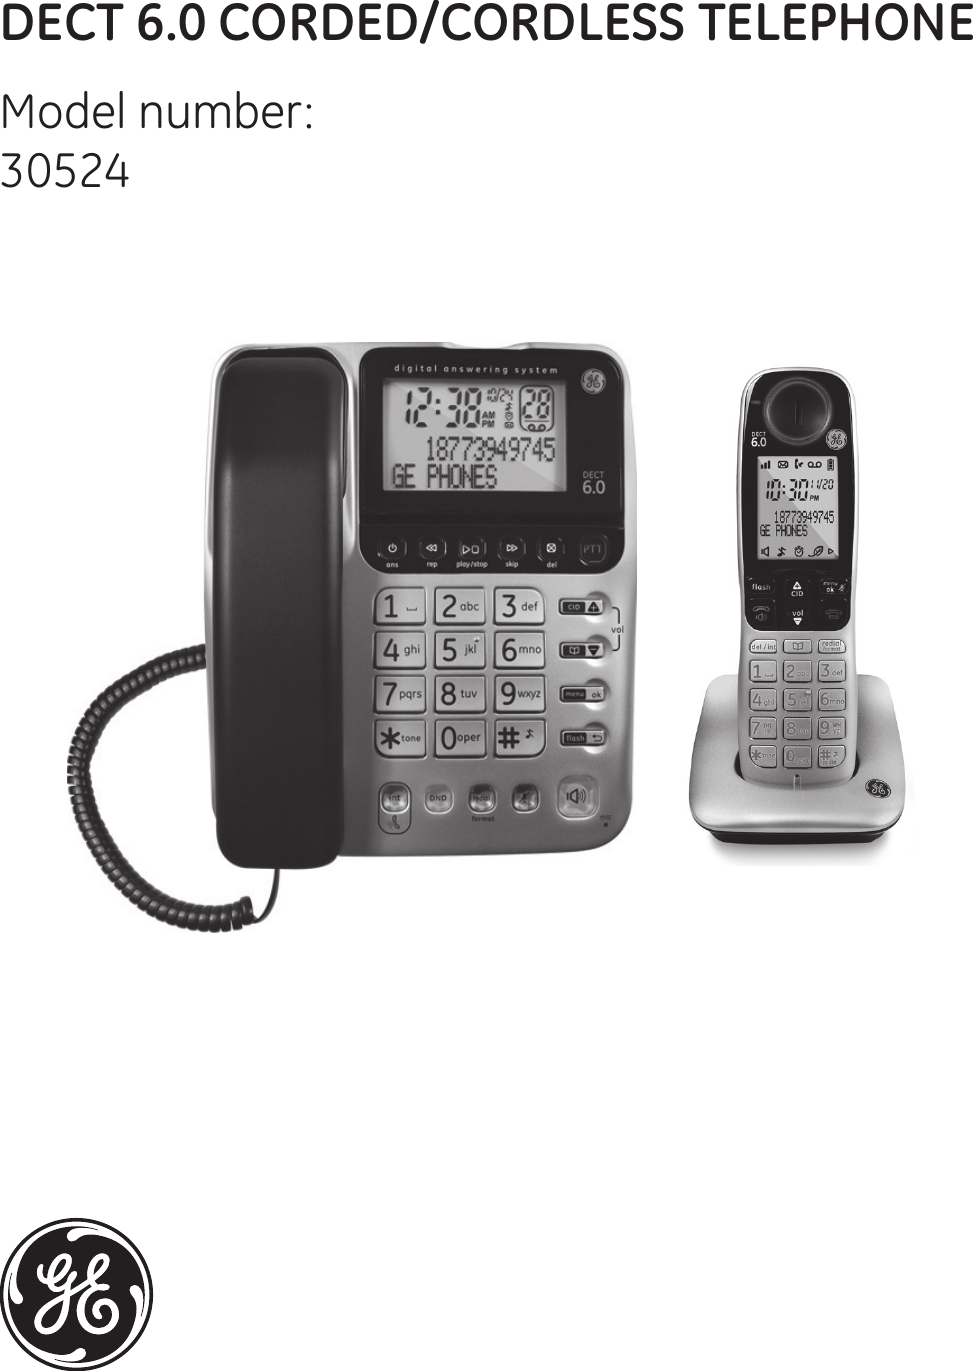 Model number: 30524DECT 6.0 CORDED/CORDLESS TELEPHONE